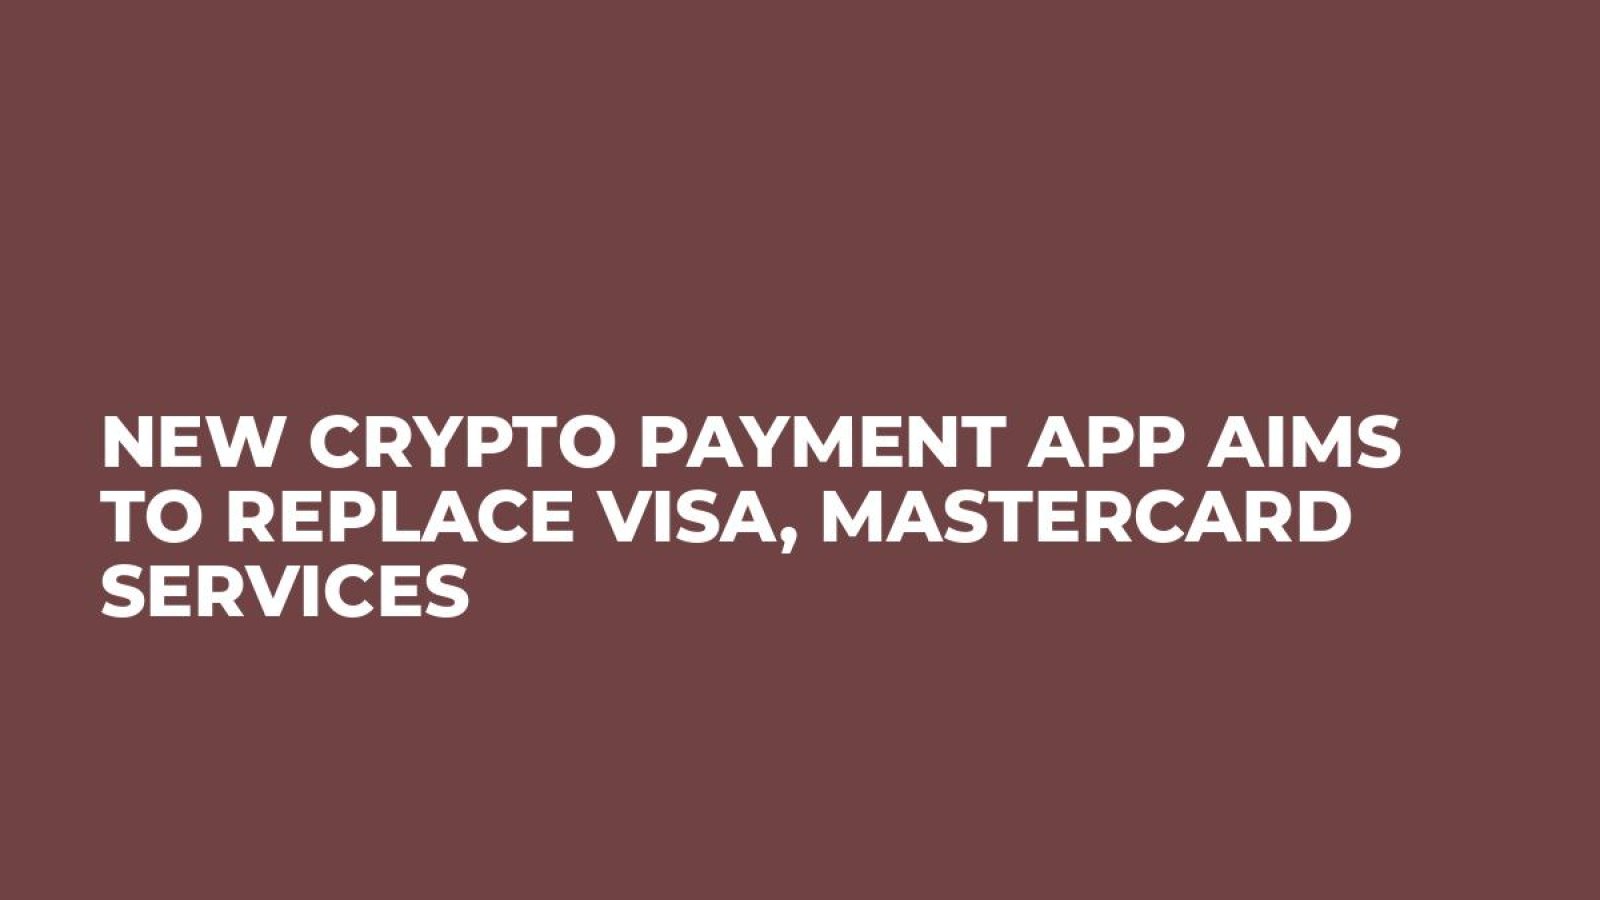 New Crypto Payment App Aims to Replace Visa, Mastercard Services